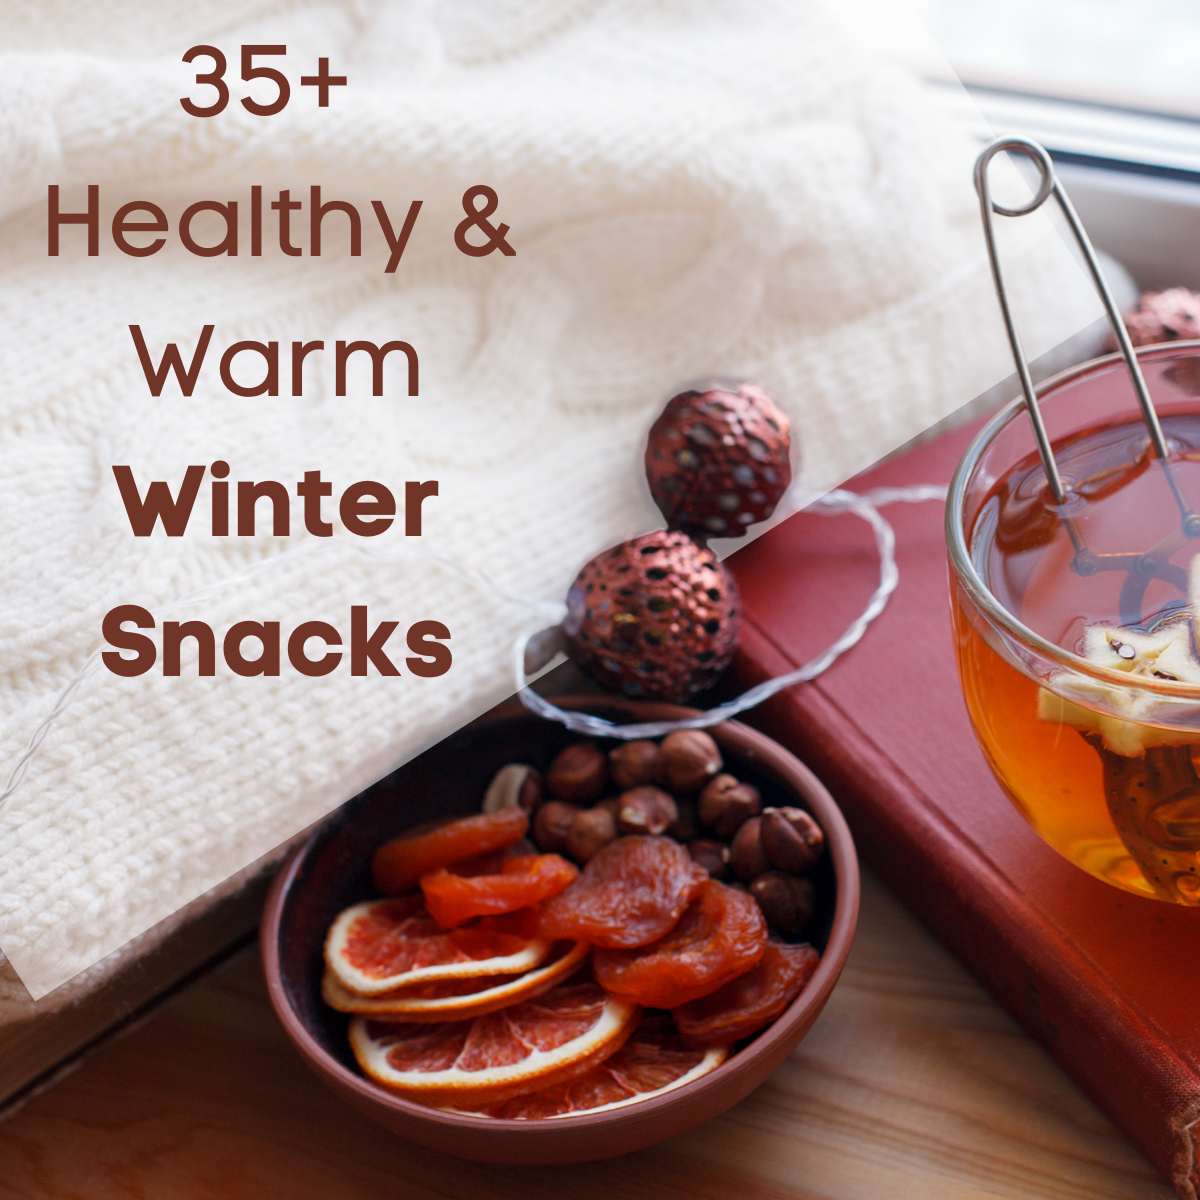 Healthy + Warm Winter Snacks for Cold Weather Days